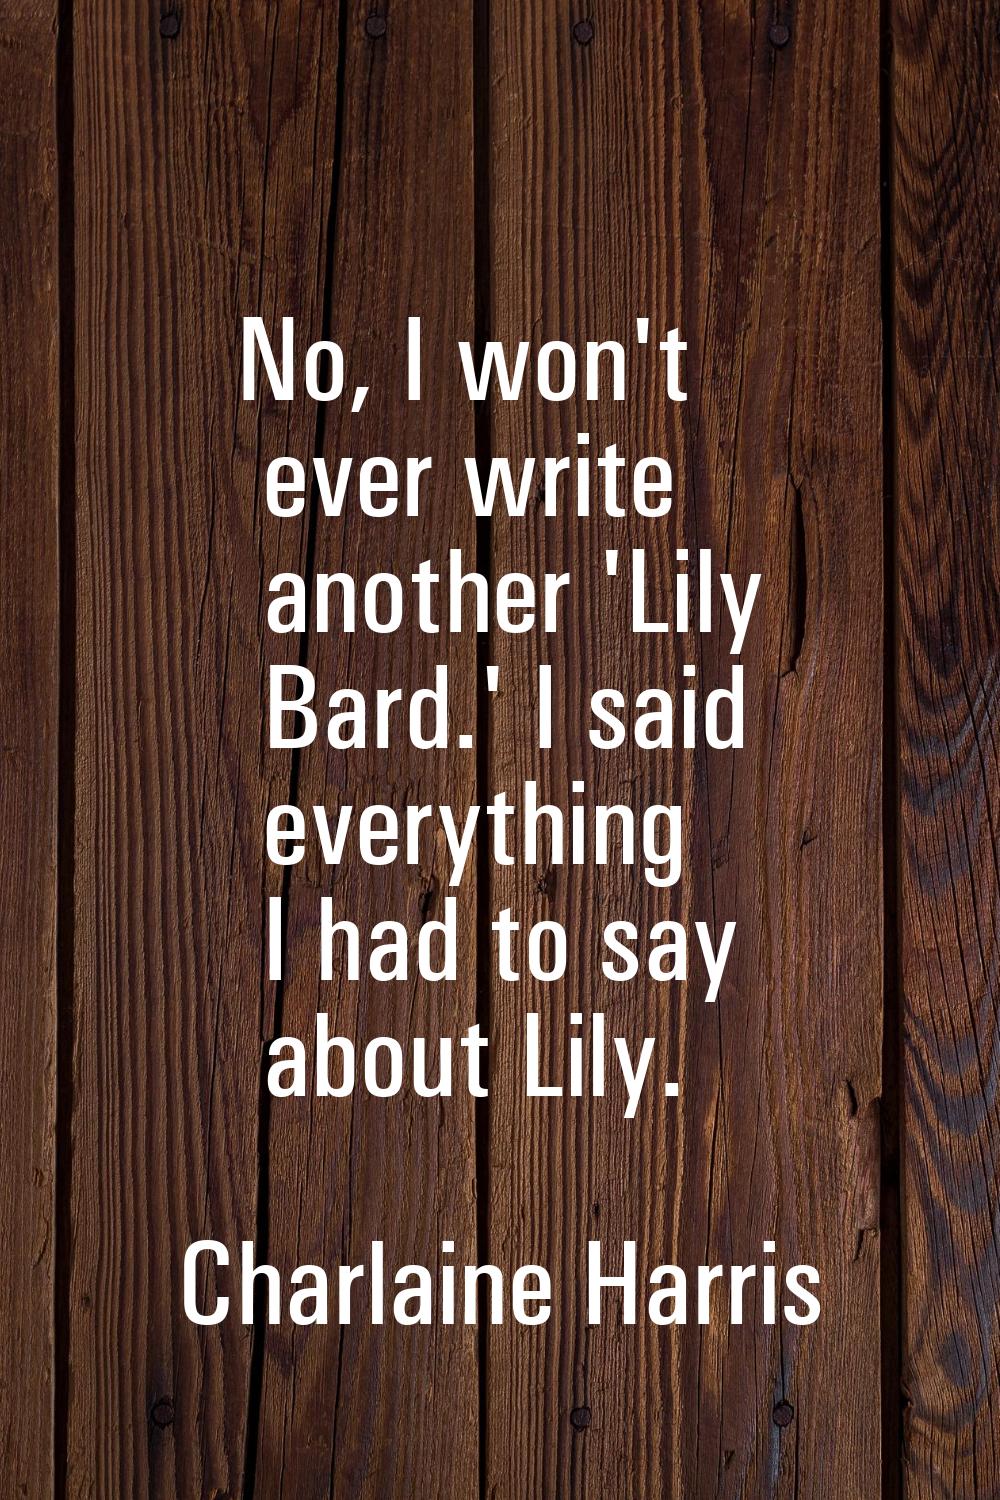 No, I won't ever write another 'Lily Bard.' I said everything I had to say about Lily.